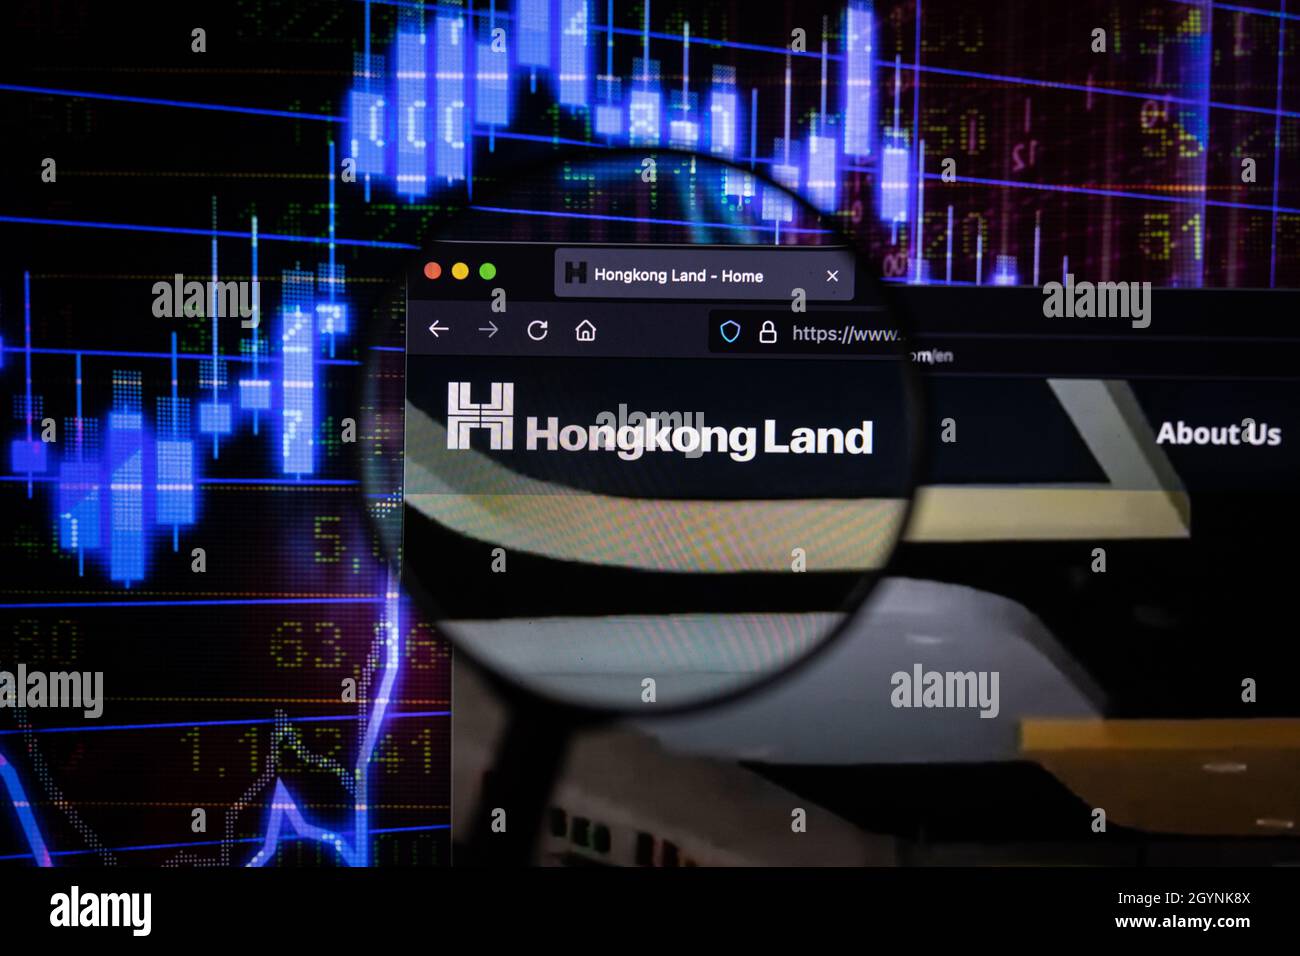 Hongkong land company logo on a website with blurry stock market developments in the background, seen on a computer screen through a magnifying glass Stock Photo